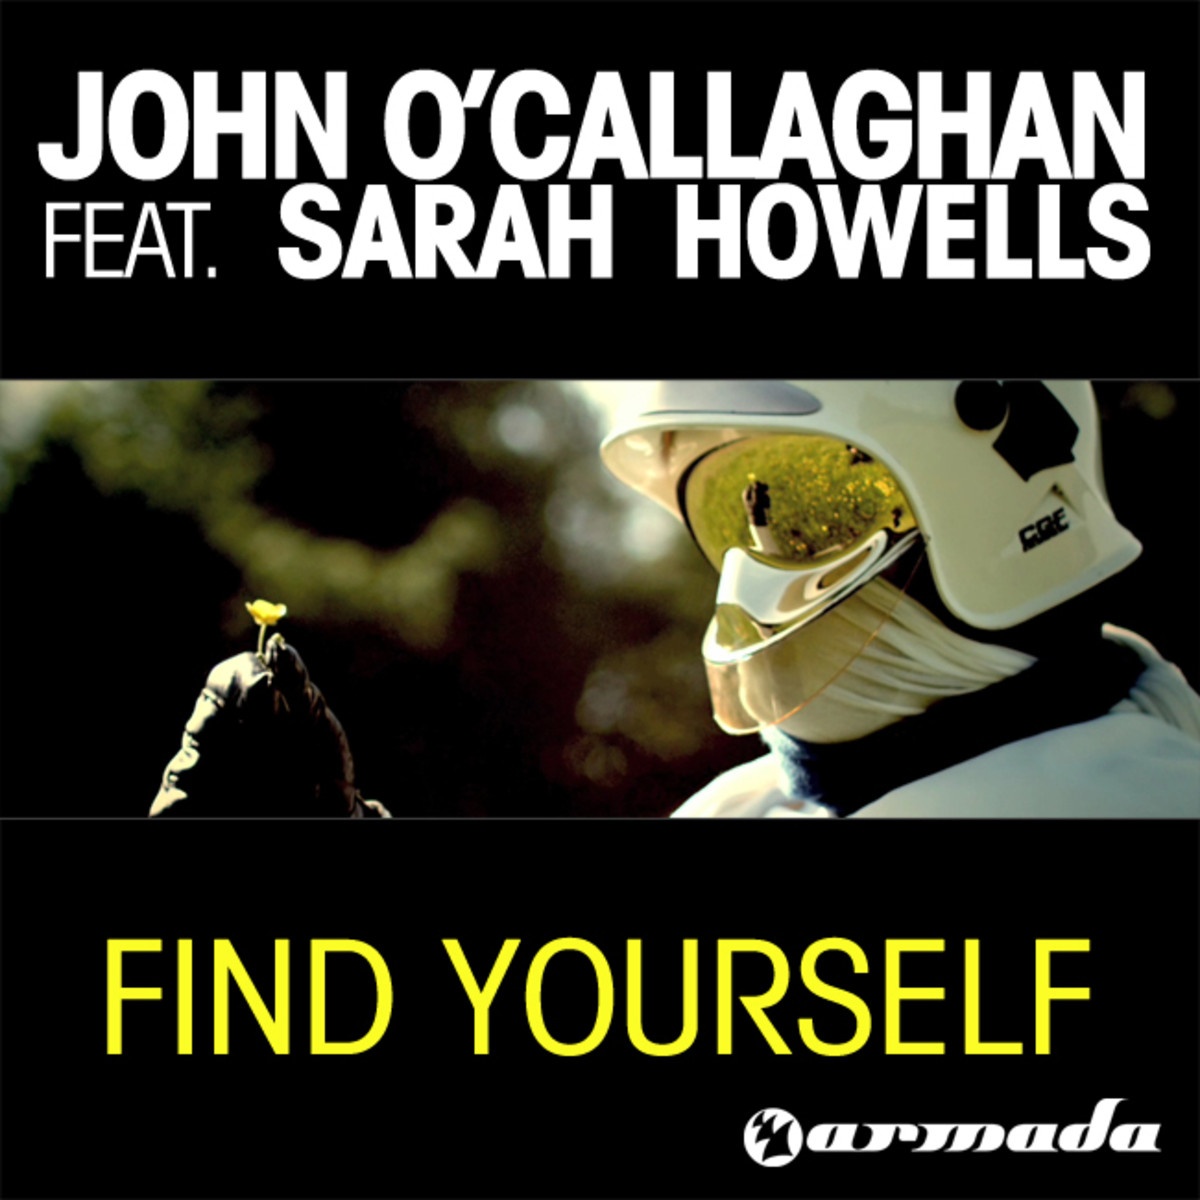 Find Yourself (Cosmic Gate Mix)